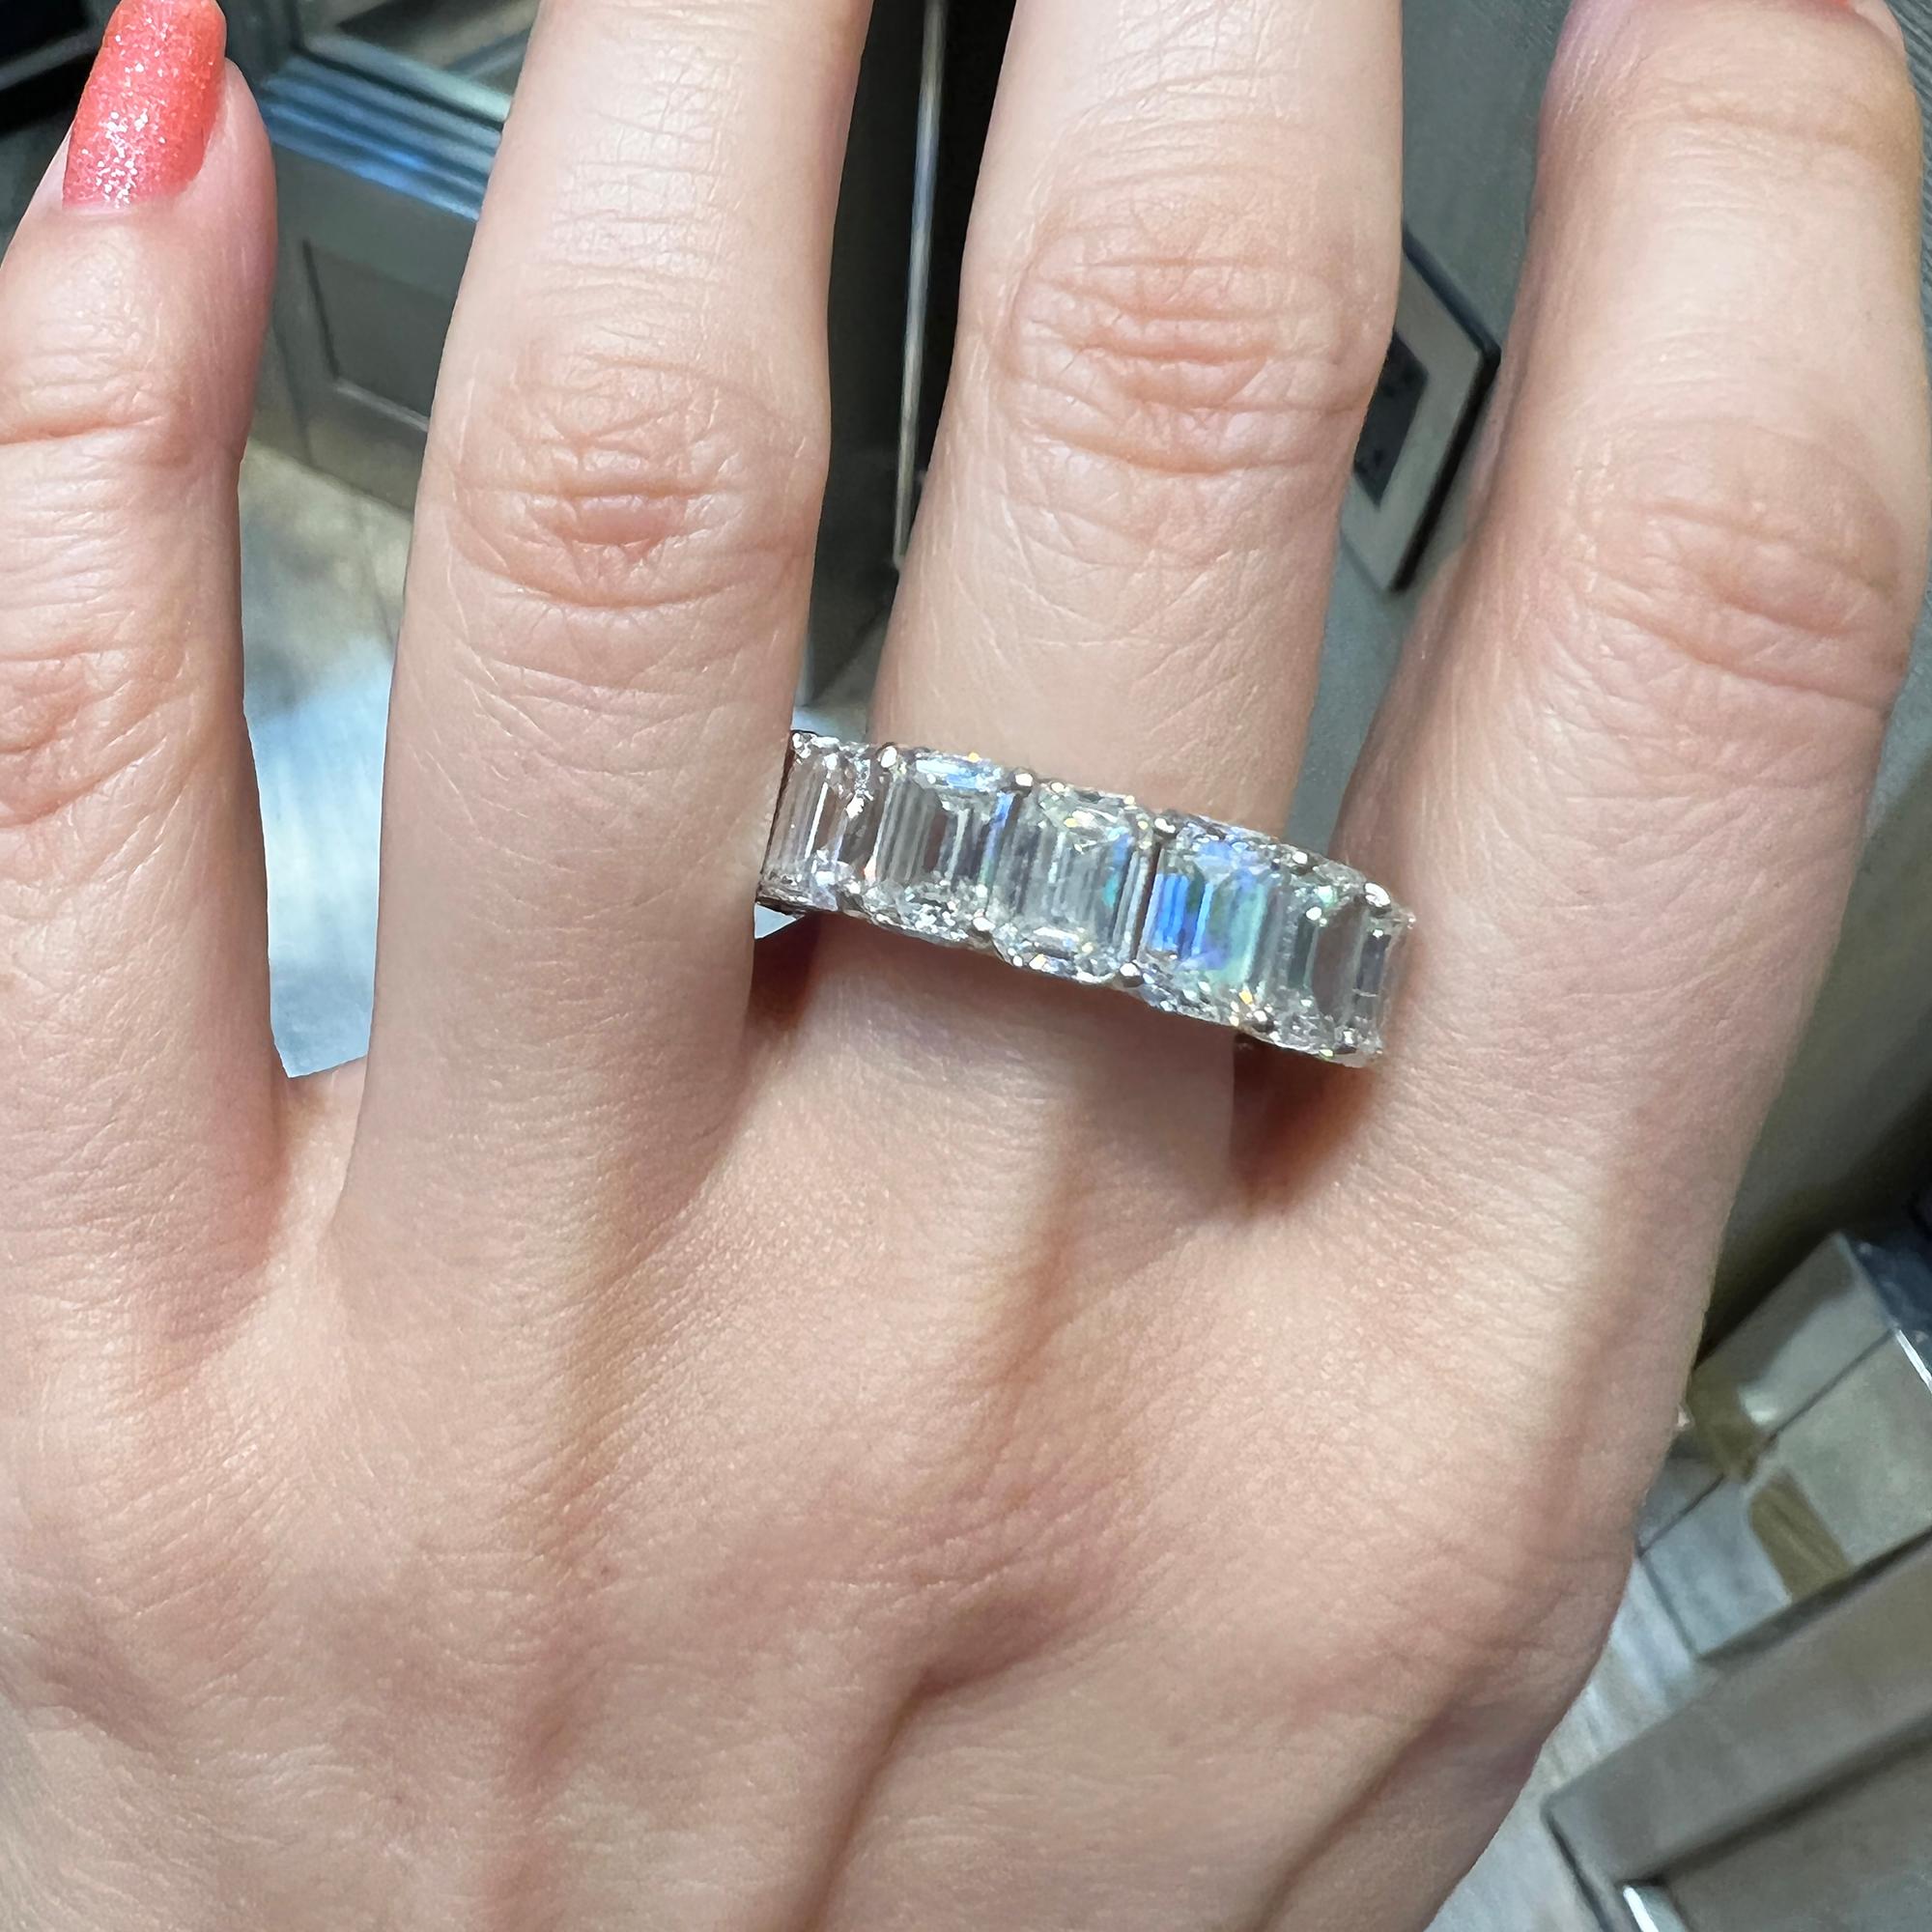 An eternity band comprising of 16 emerald-cut natural diamonds with H color, VVS2-SI1 clarity.
Total weight is 15.27 carats, 1 carat each. 
All diamonds are GIA certified.
Metal is platinum 12.46gr.
Size 8.5.